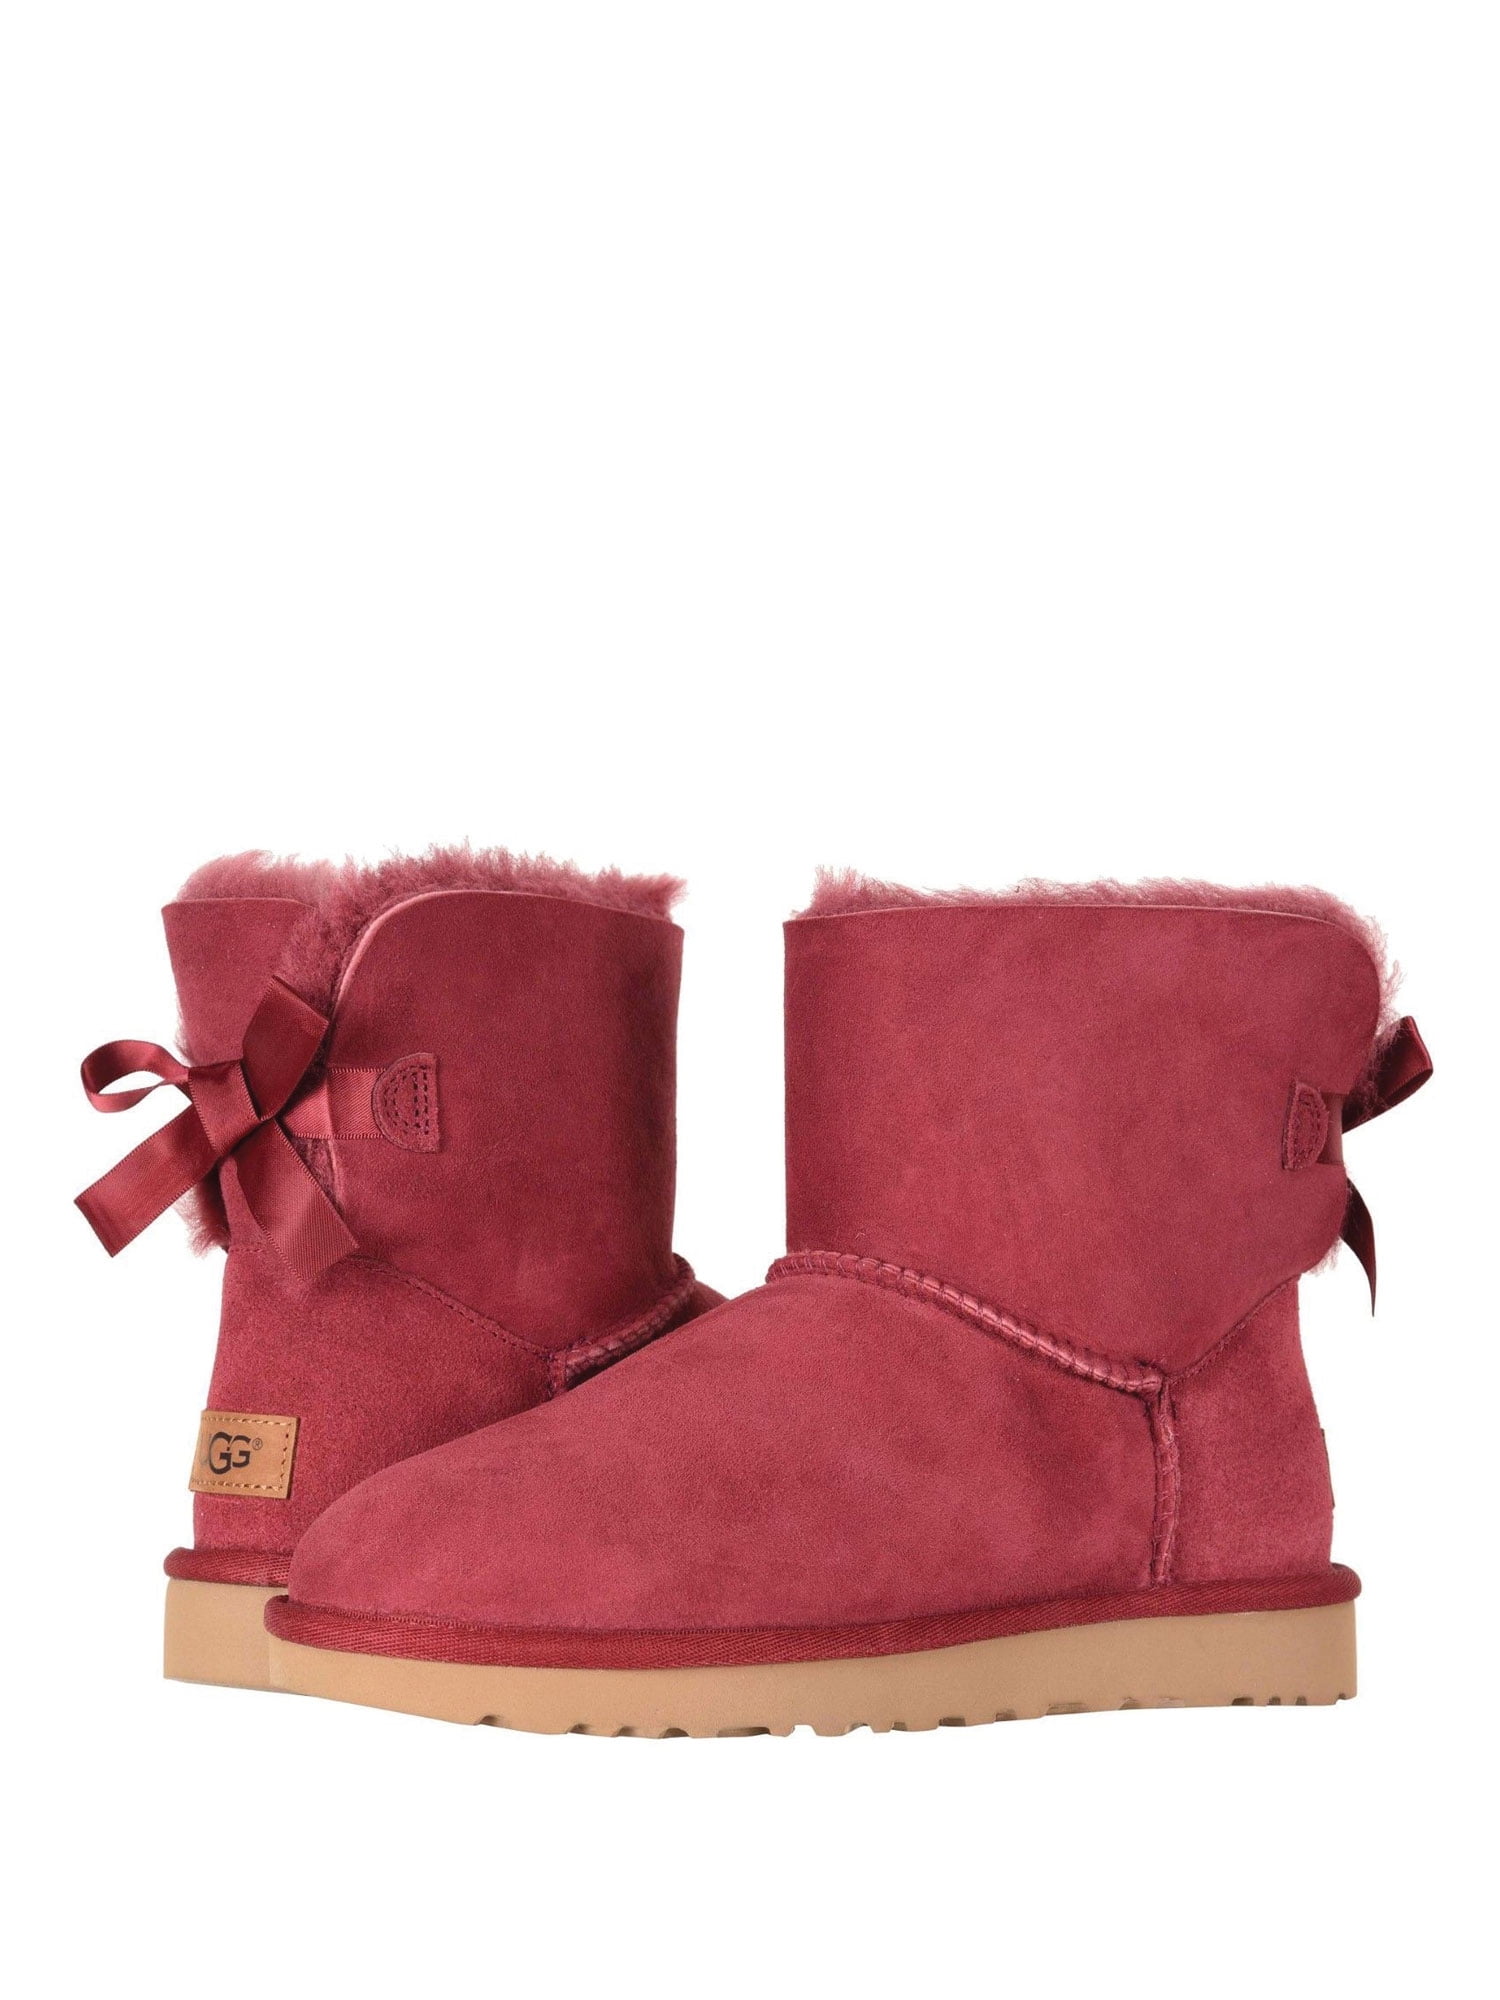 burgundy uggs with bows